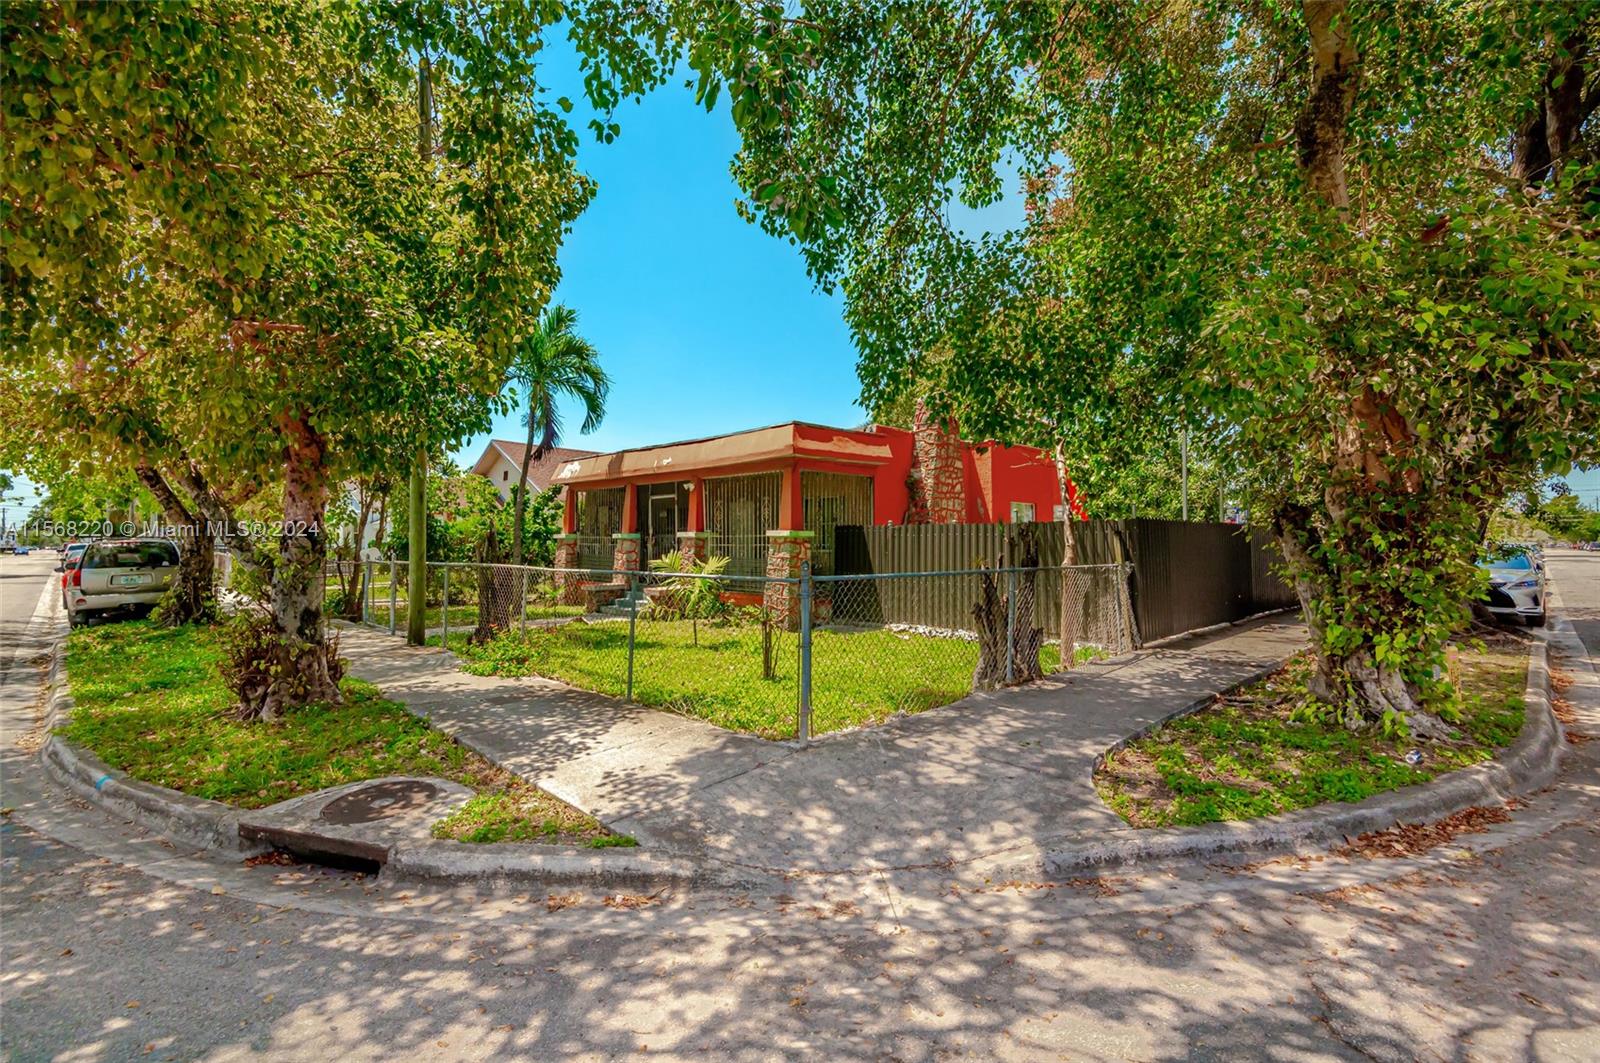 2512 NW 19th Ave, Miami, Florida 33142, 3 Bedrooms Bedrooms, ,2 BathroomsBathrooms,Residential,For Sale,2512 NW 19th Ave,A11568220